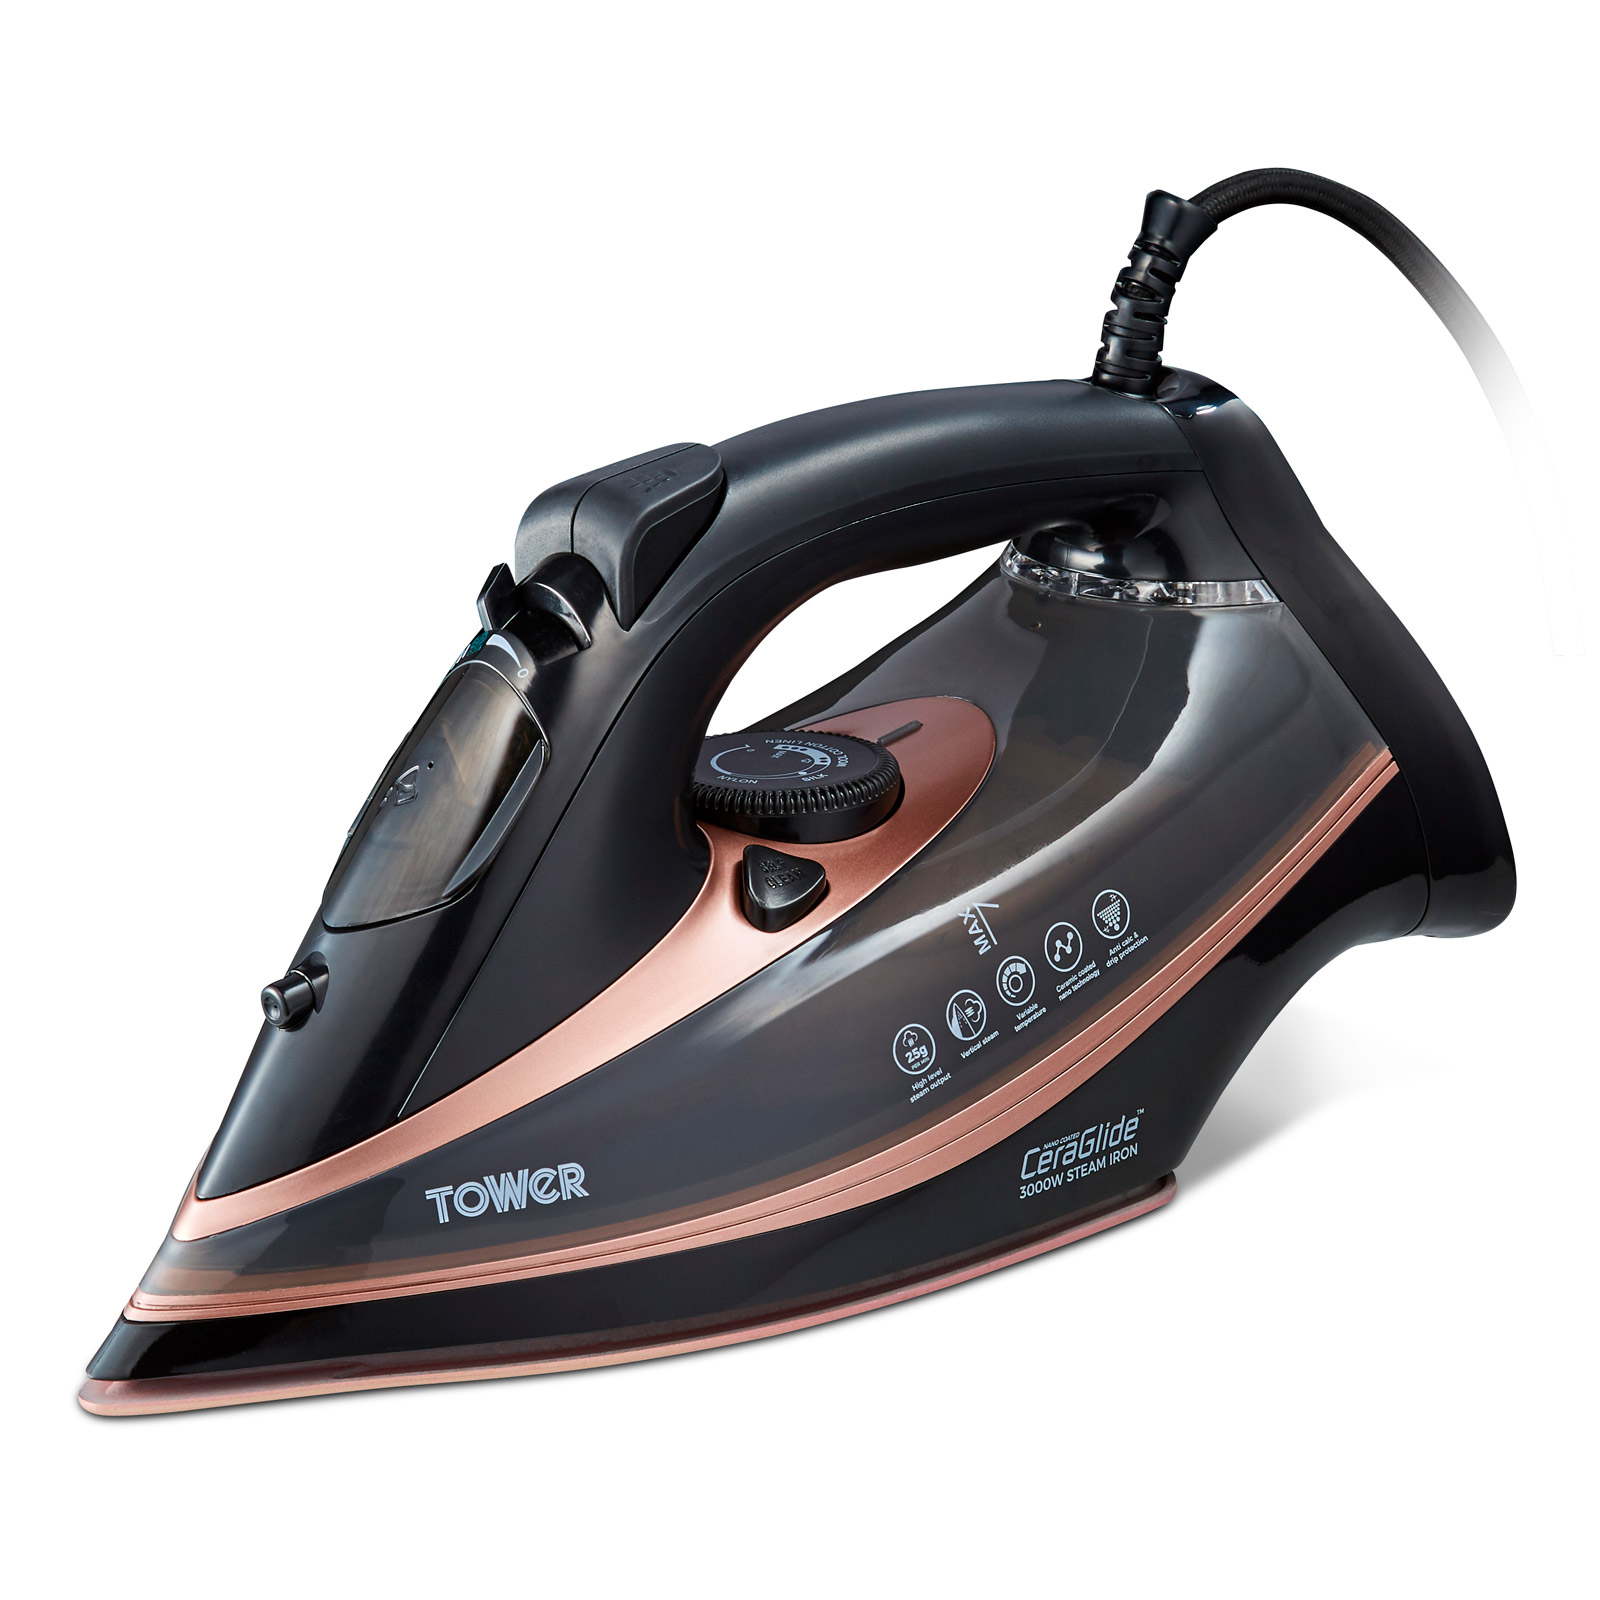 Image of Tower T22013 CeraGlide Ultra Speed Steam Iron 3100W Black Gold